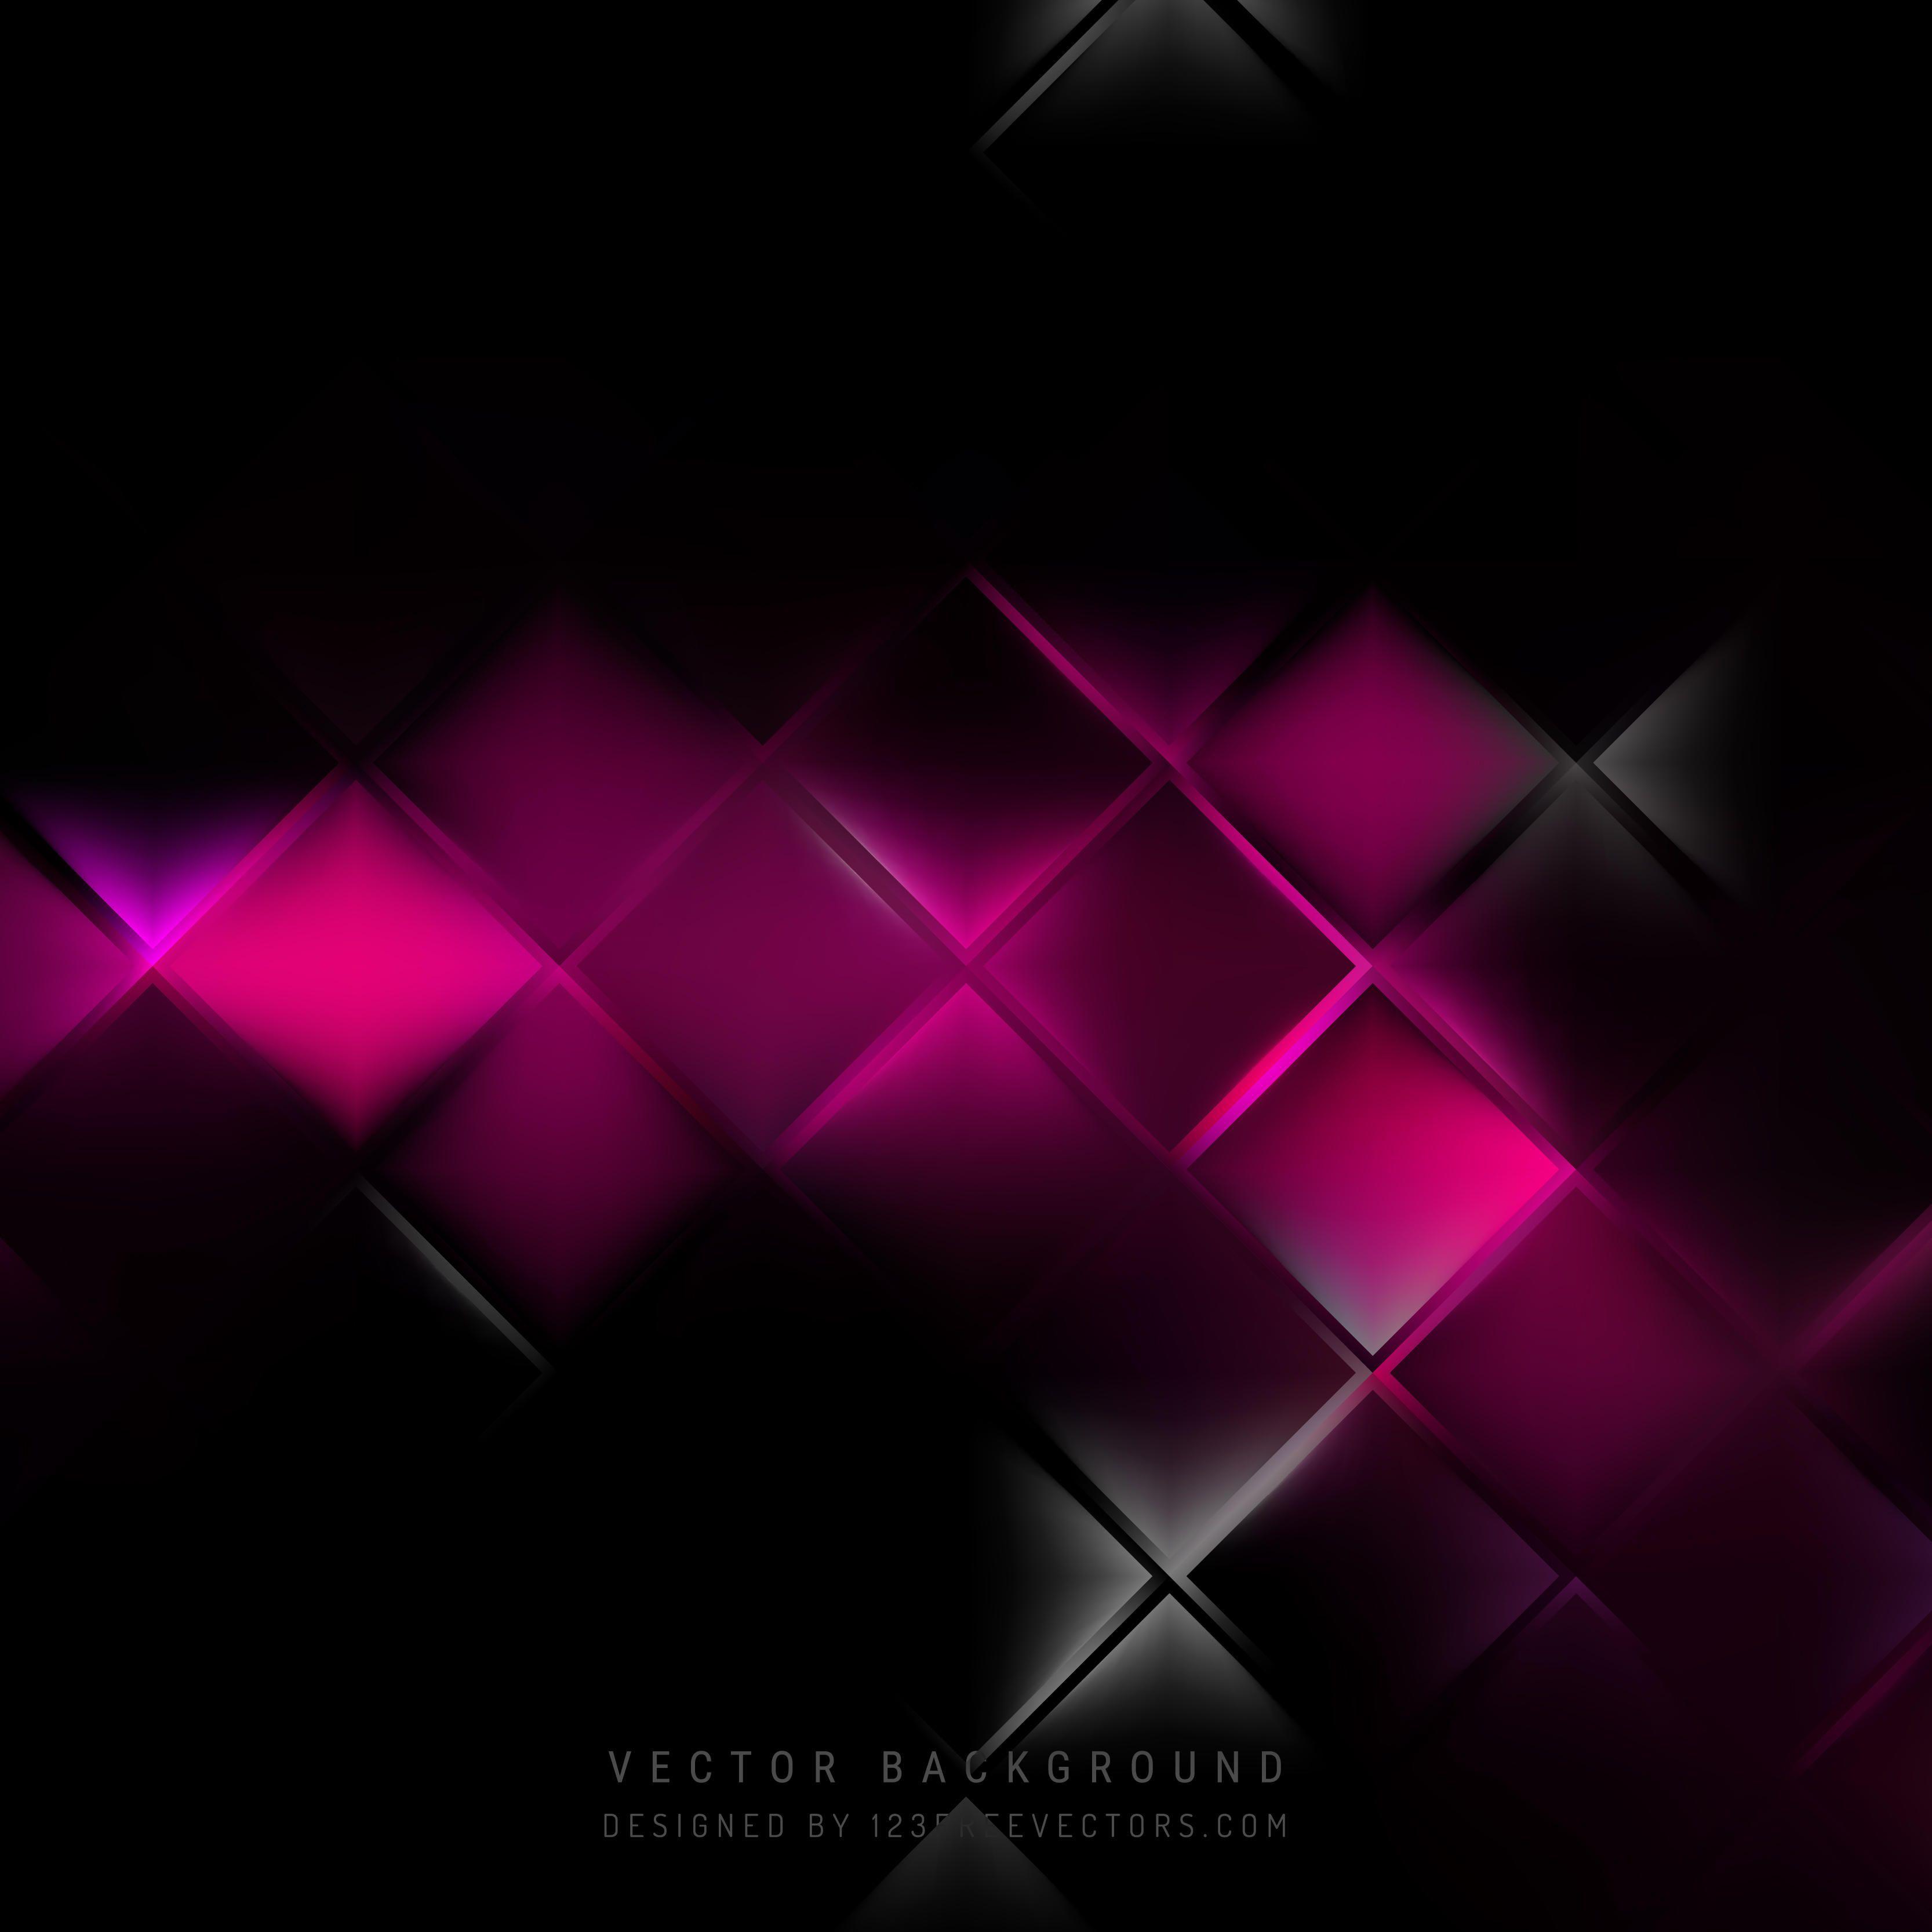 Abstract Black Pink Square Background DesignFreevectors